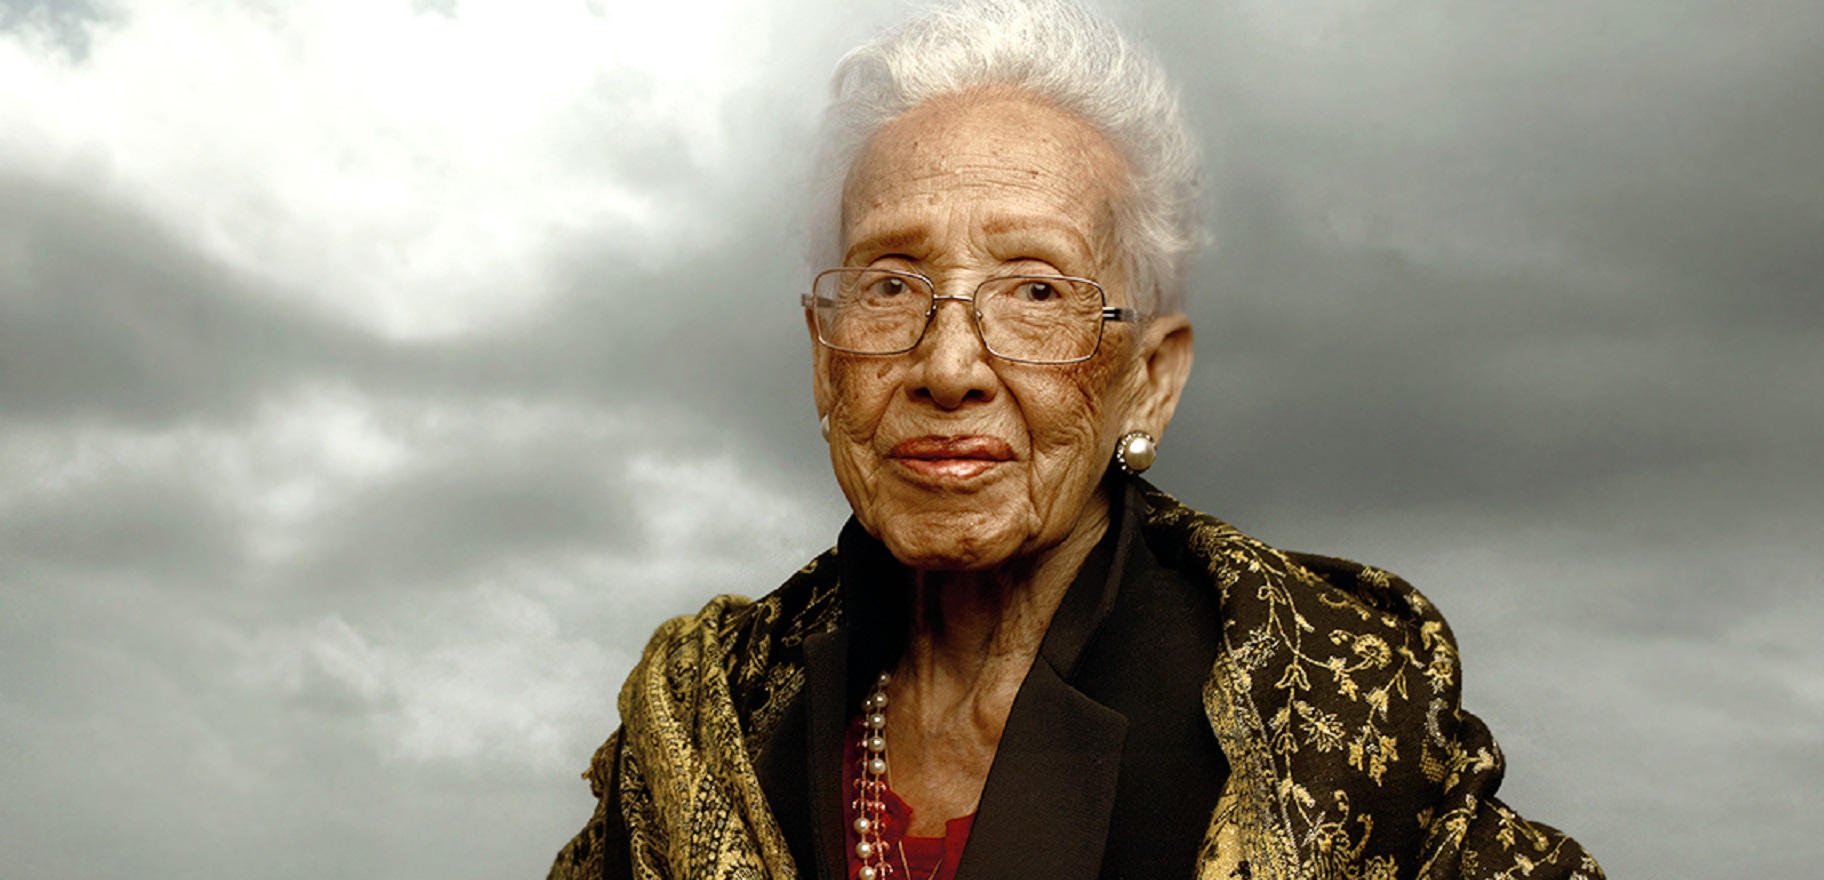 Katherine Johnson, Mathematician Who Inspired ‘Hidden Figures’, Has Died Aged 101